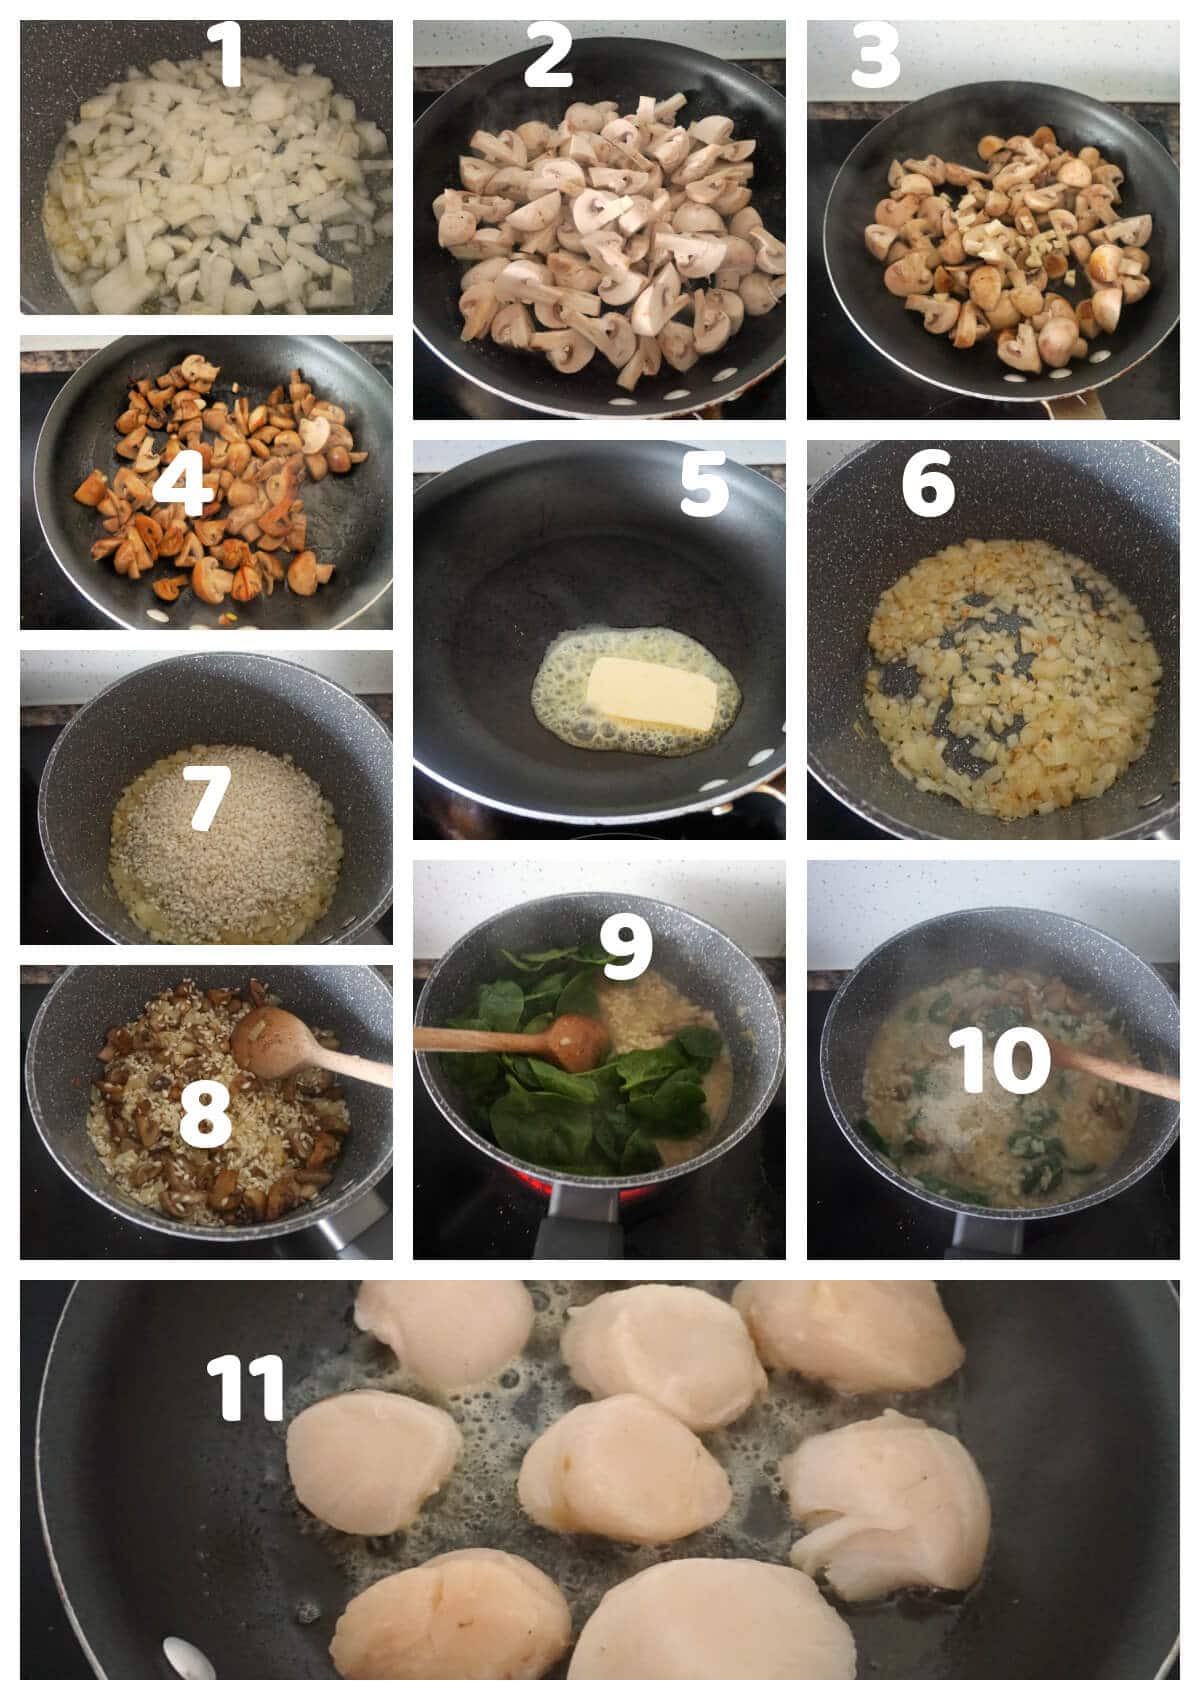 Collage of 11 pictures to show how to make mushroom risotto with seared scallops